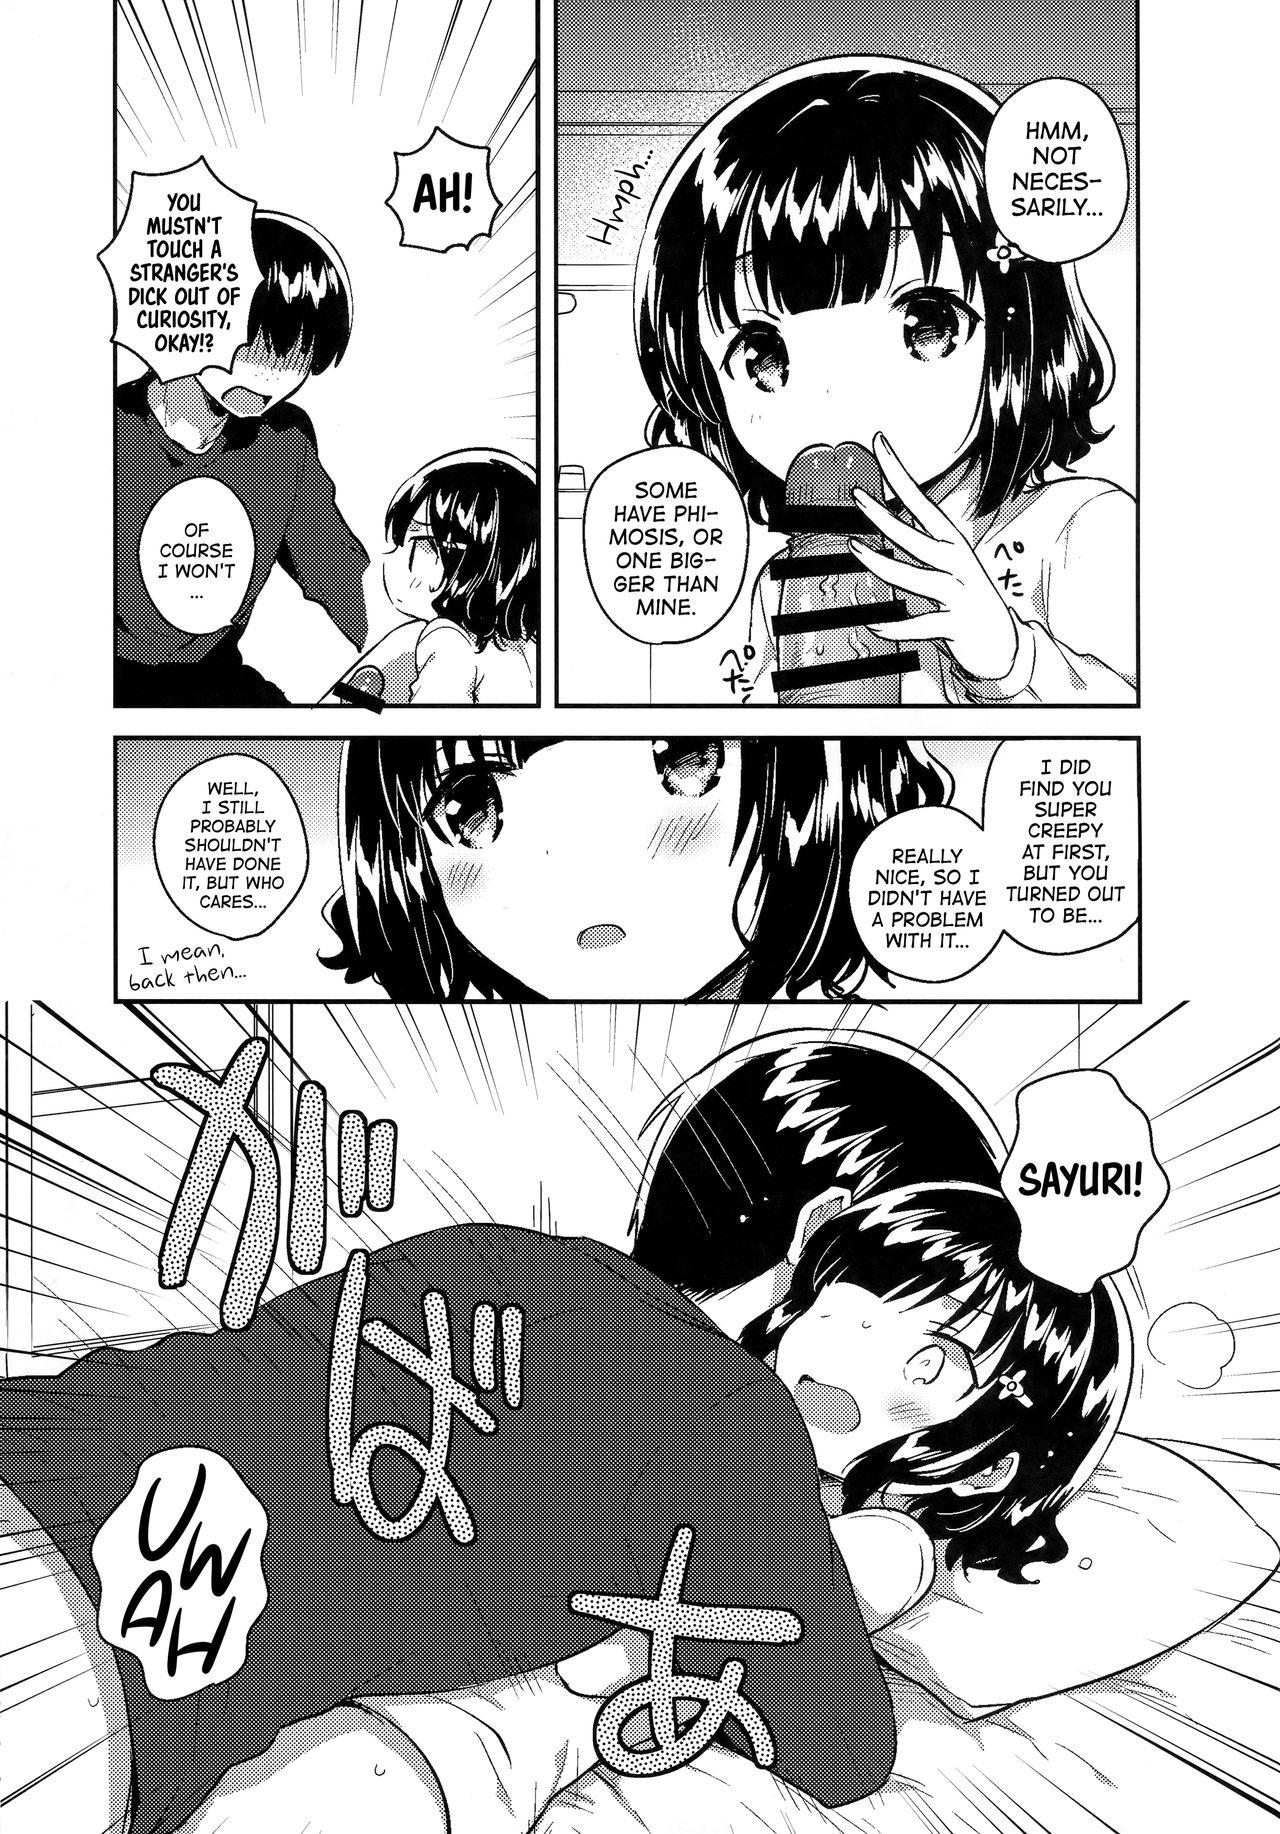 Amature Love Letter wa Doko ni Itta no ka? | Where did the love letter go? - Original Hairypussy - Page 5